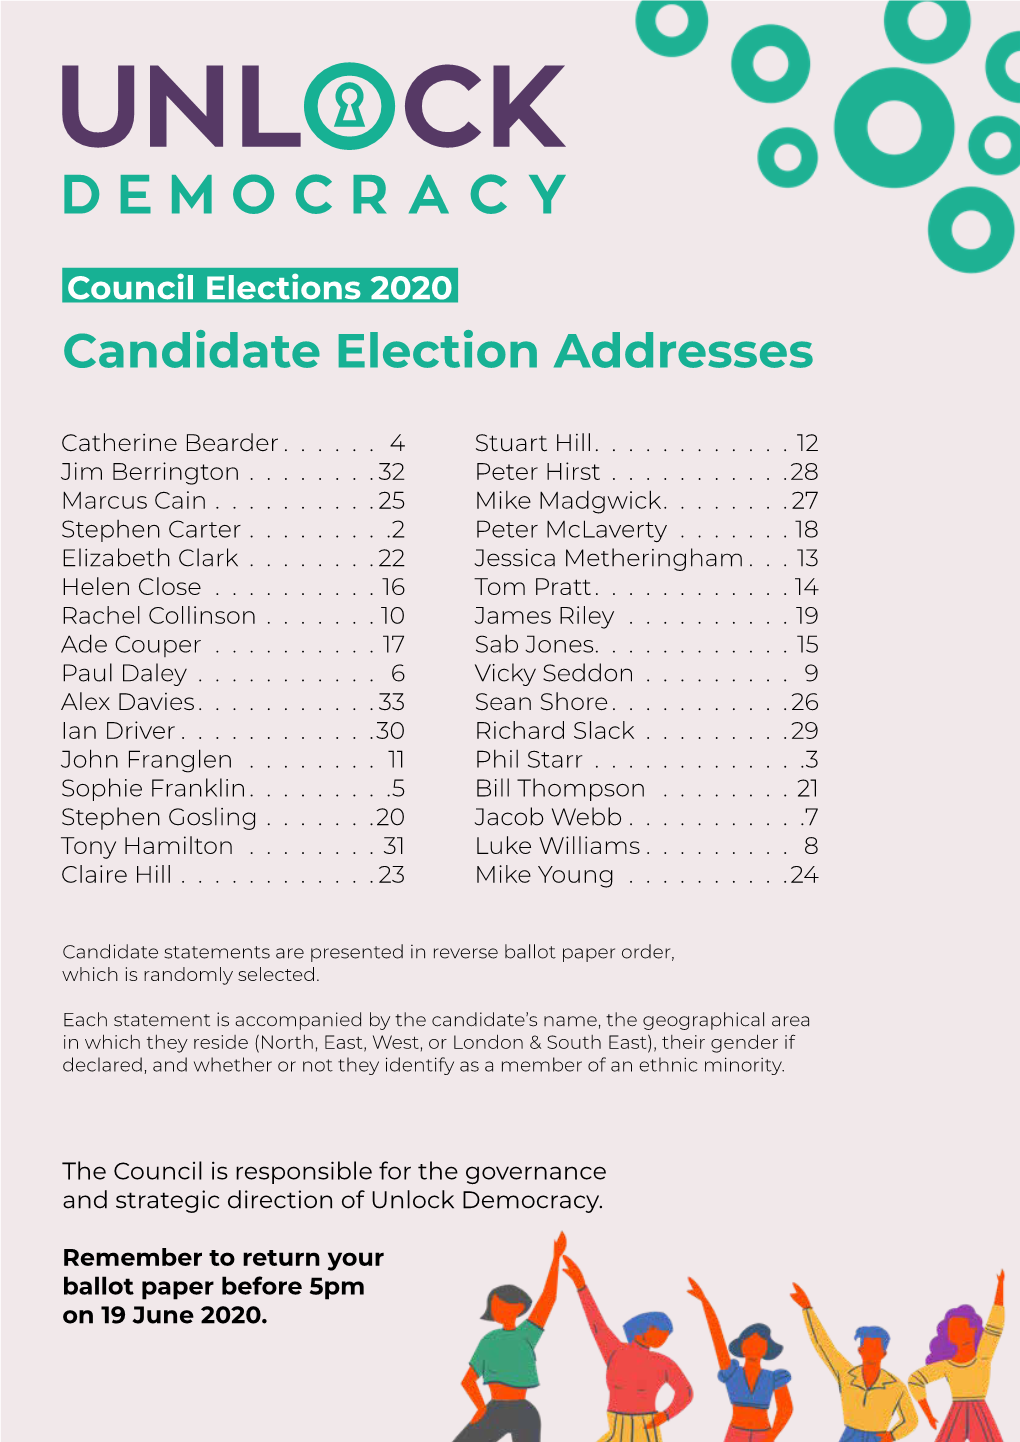 Candidate Election Addresses